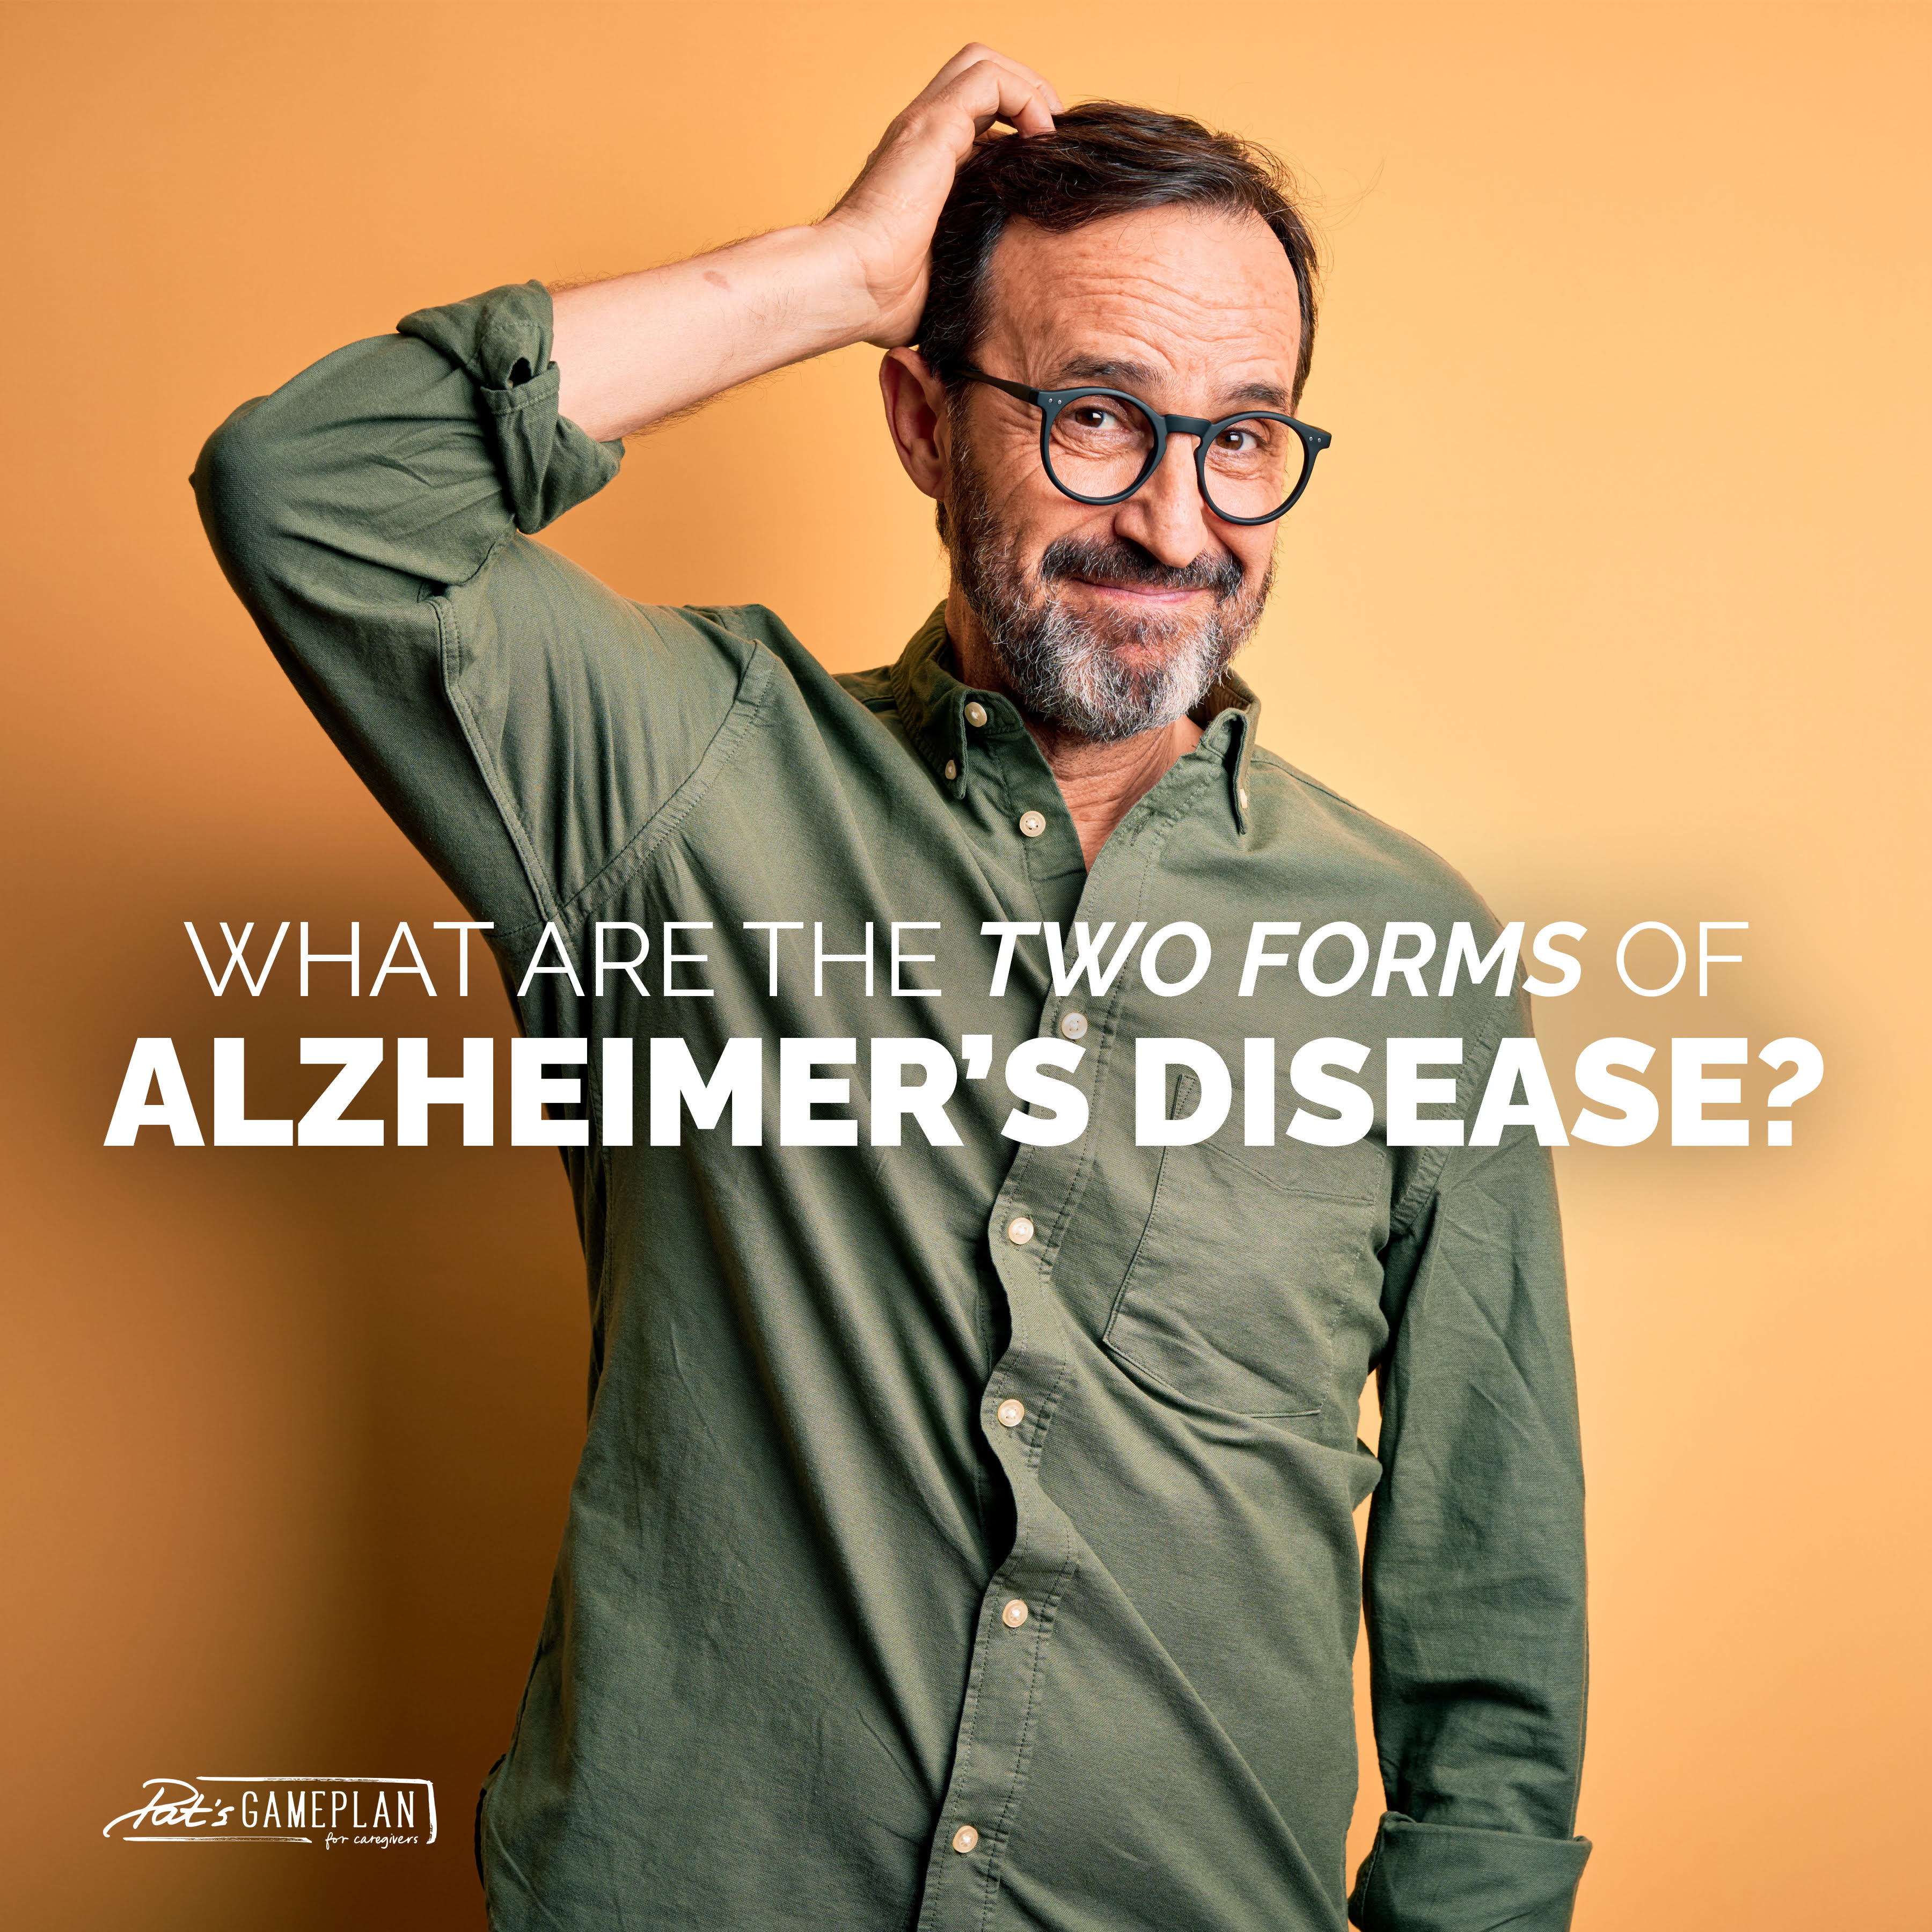 What are the two forms of Alzheimer's diesease?